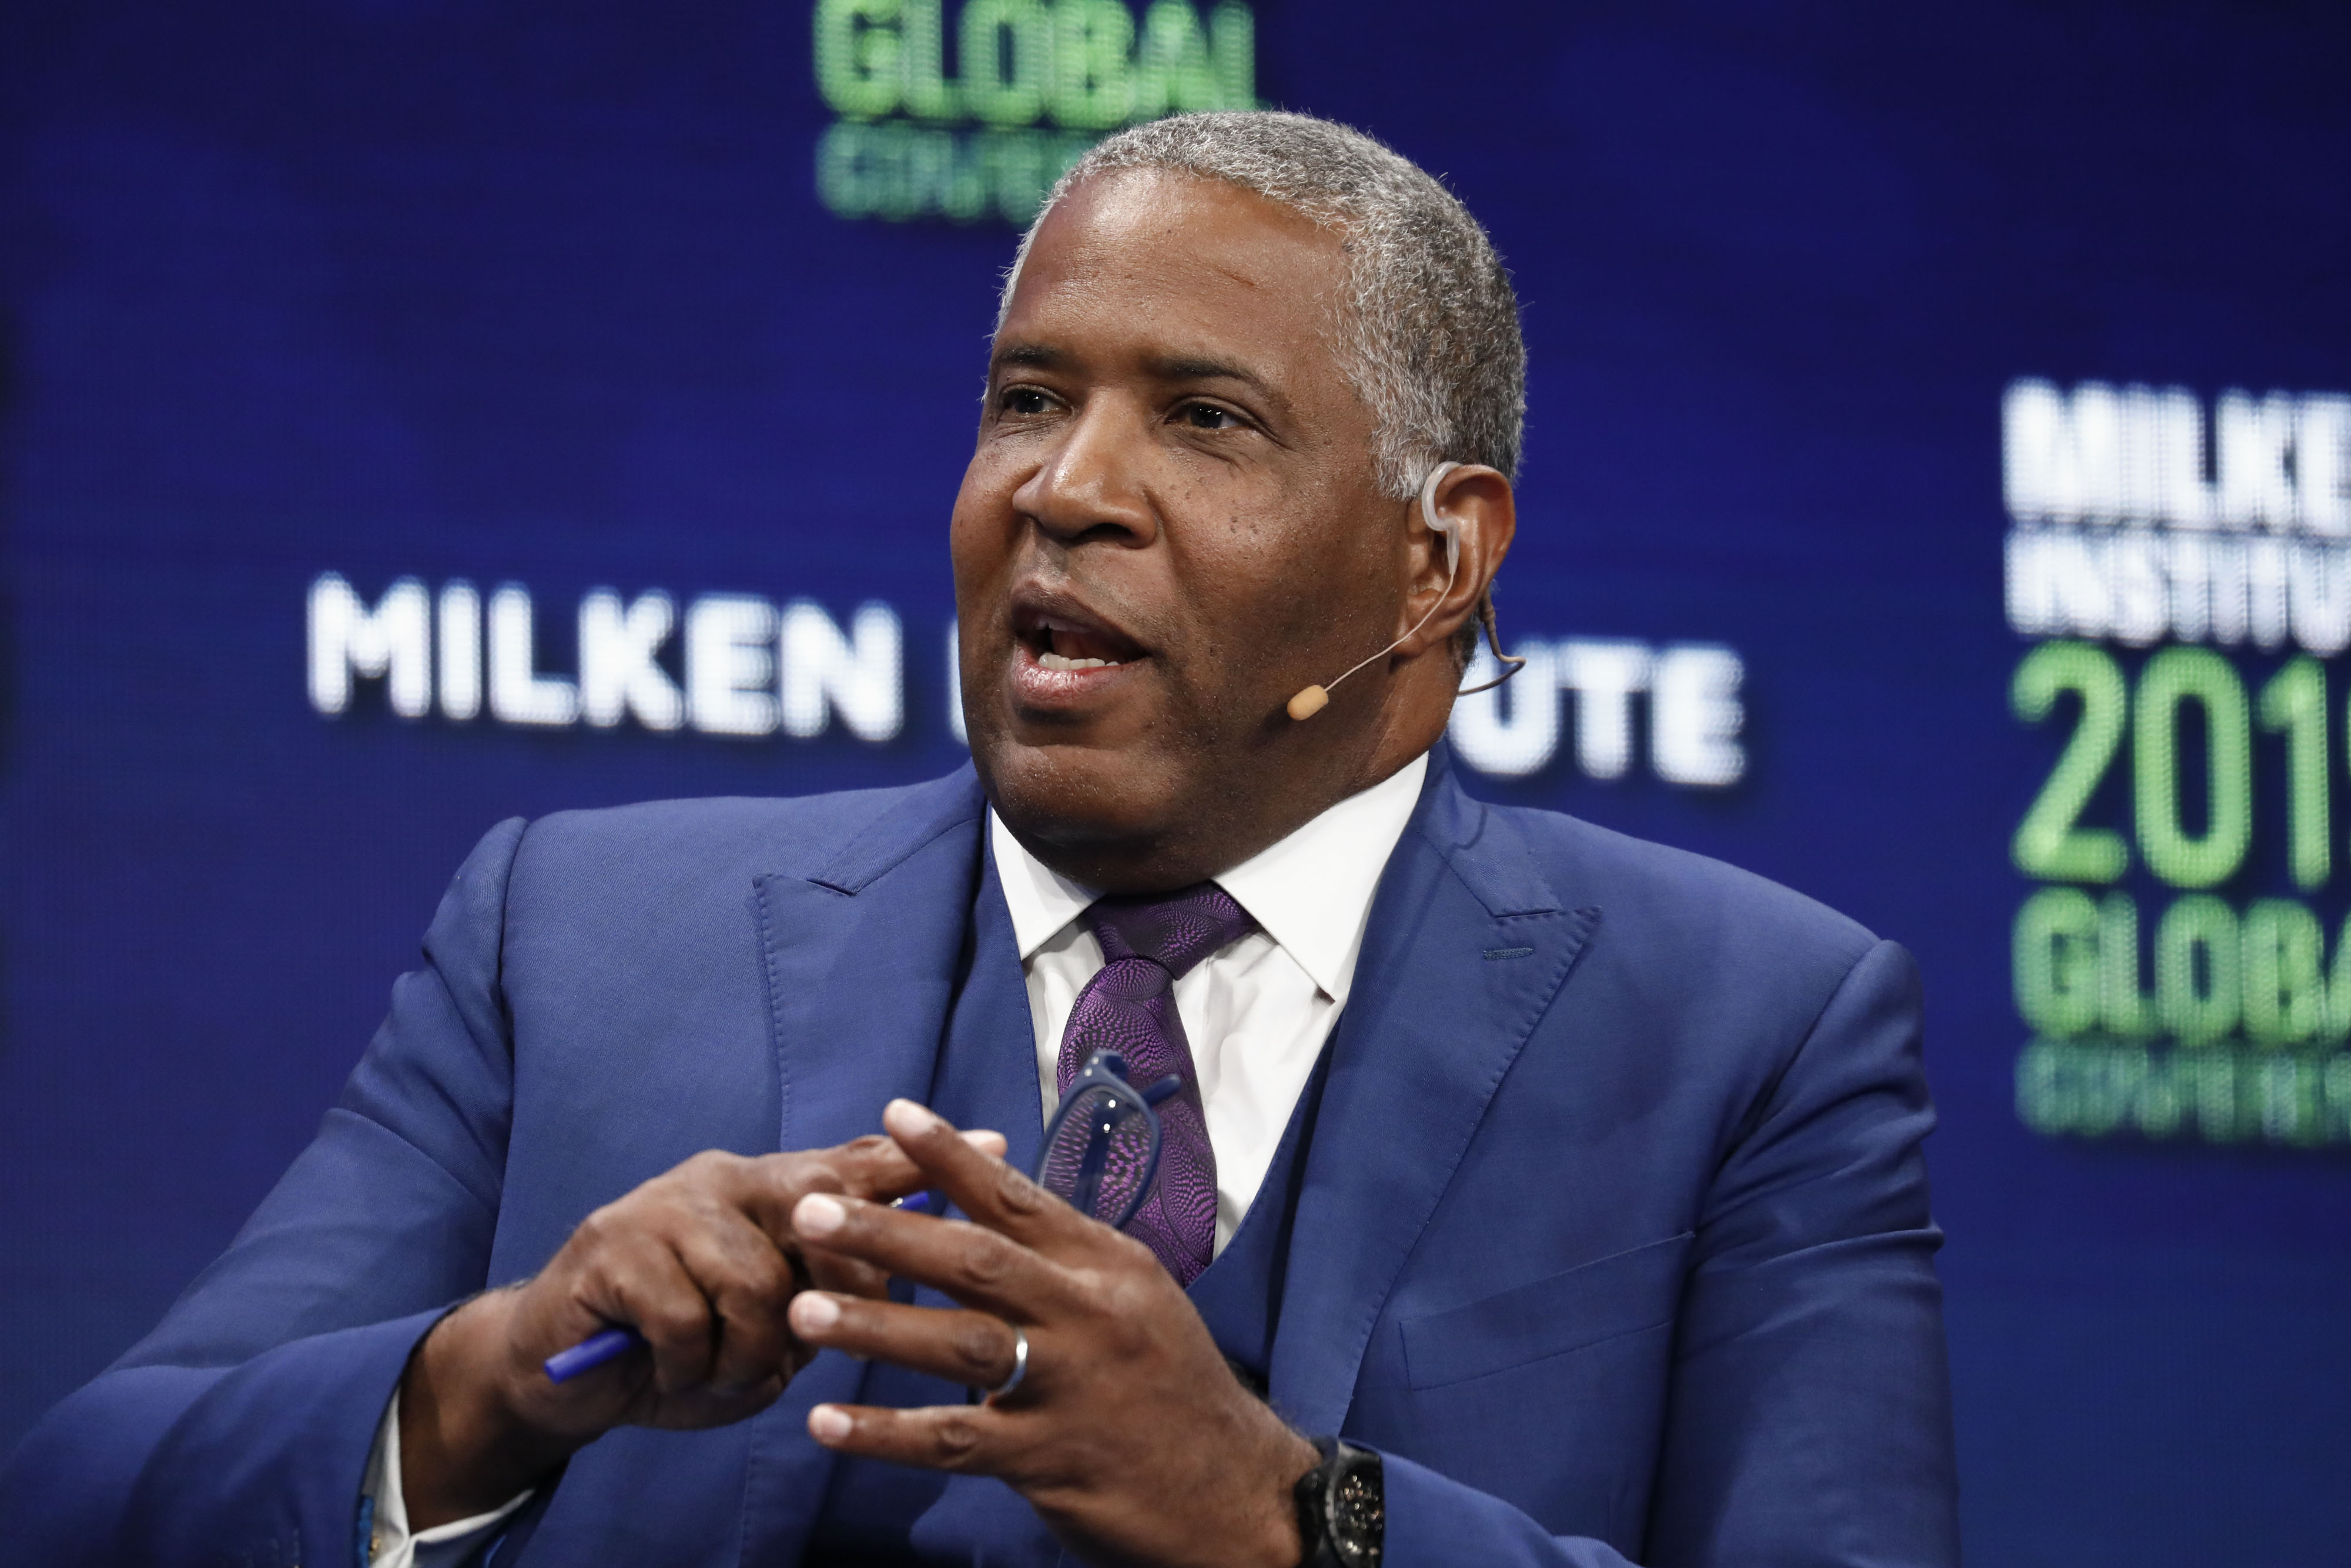 Robert Smith, chairman and chief executive officer of Vista Equity Partners